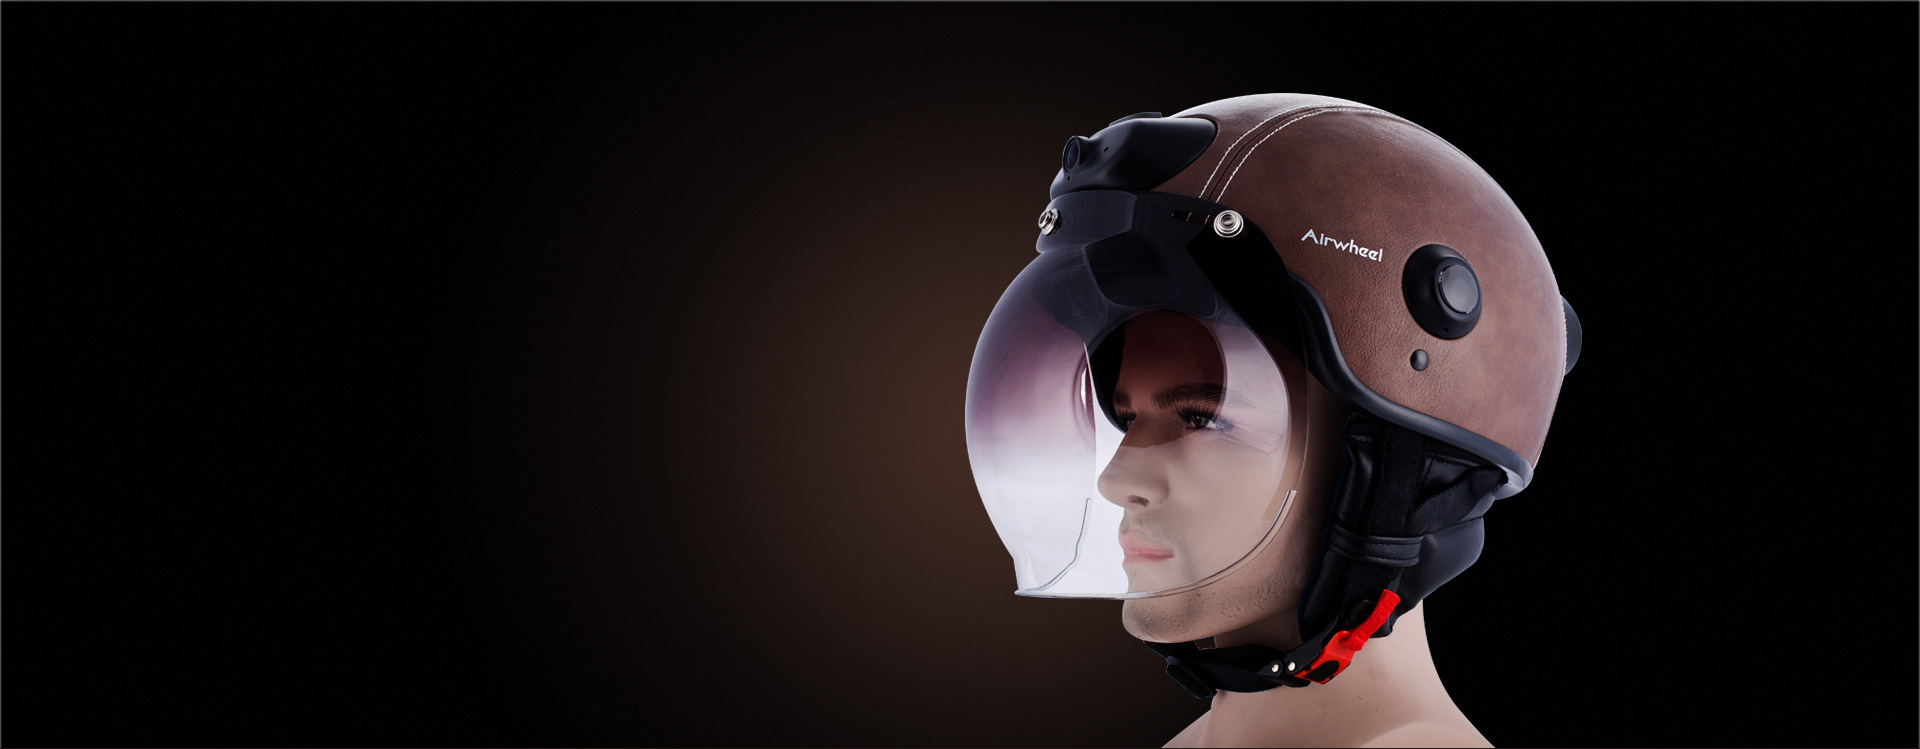 The Airwheel Latest Smart Helmets in 2017—C6 and C8